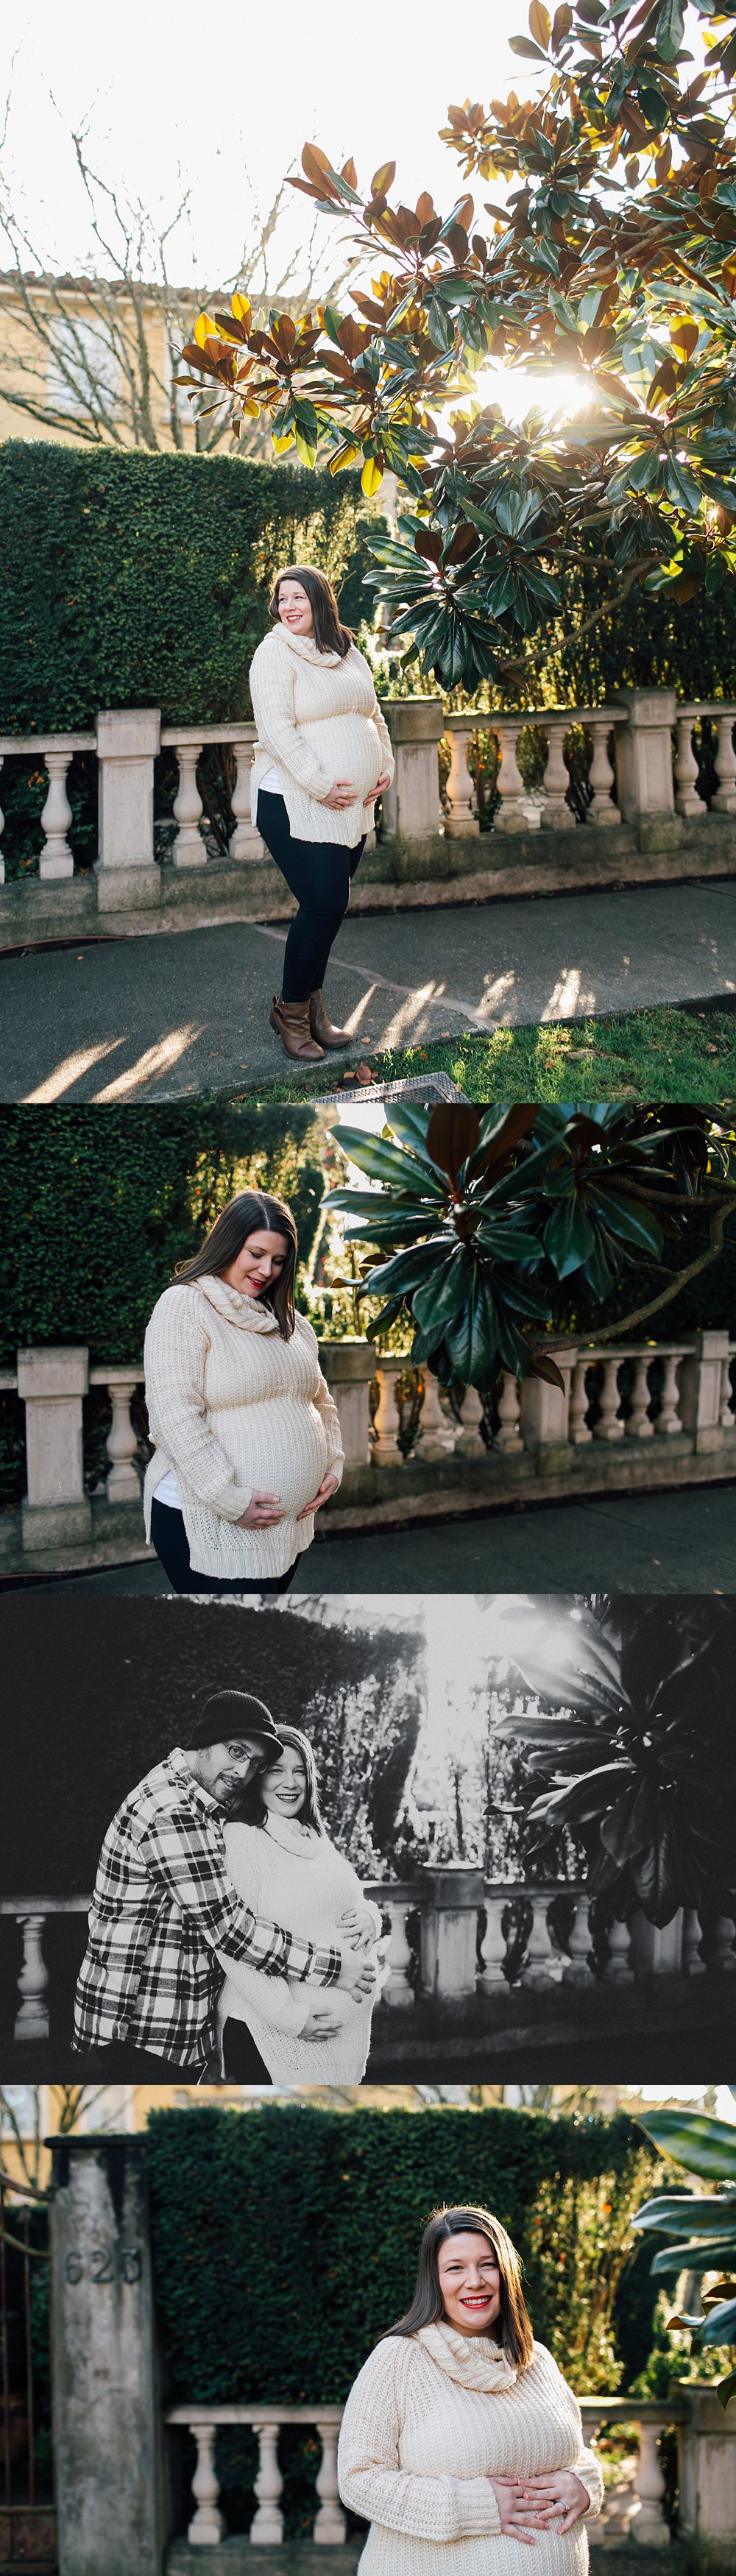 seattle maternity photographer lifestyle PNW space needle maternity queen anne-1.jpg